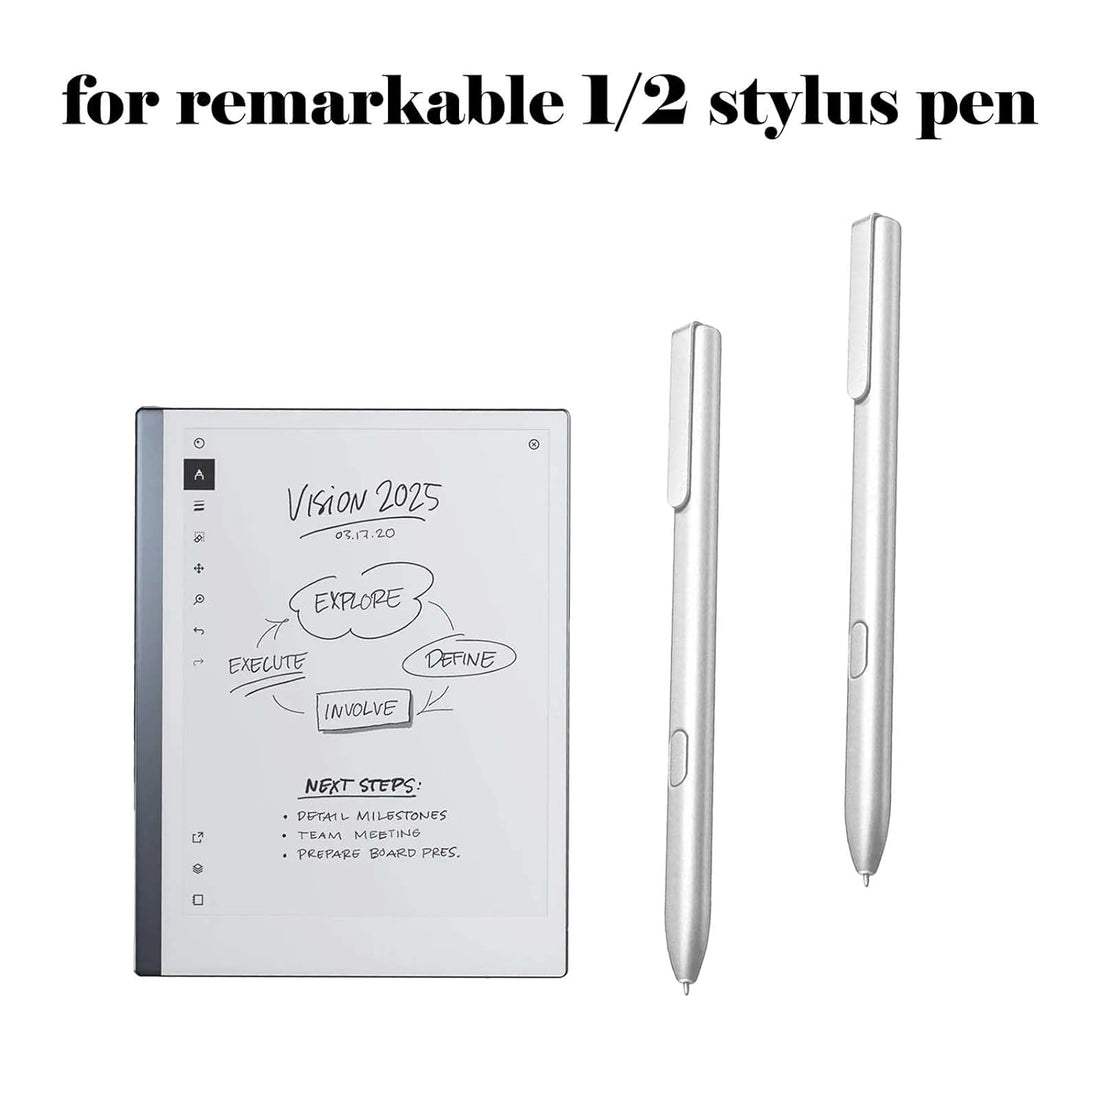 2 Pack Stylus Pen for Remarkable 2,Replacement Pen for Remarkable 1,EMR Stylus with Palm Rejection,Compatible Remarkable 1 with Eraser,4096 Pressure Levels(Silvery)